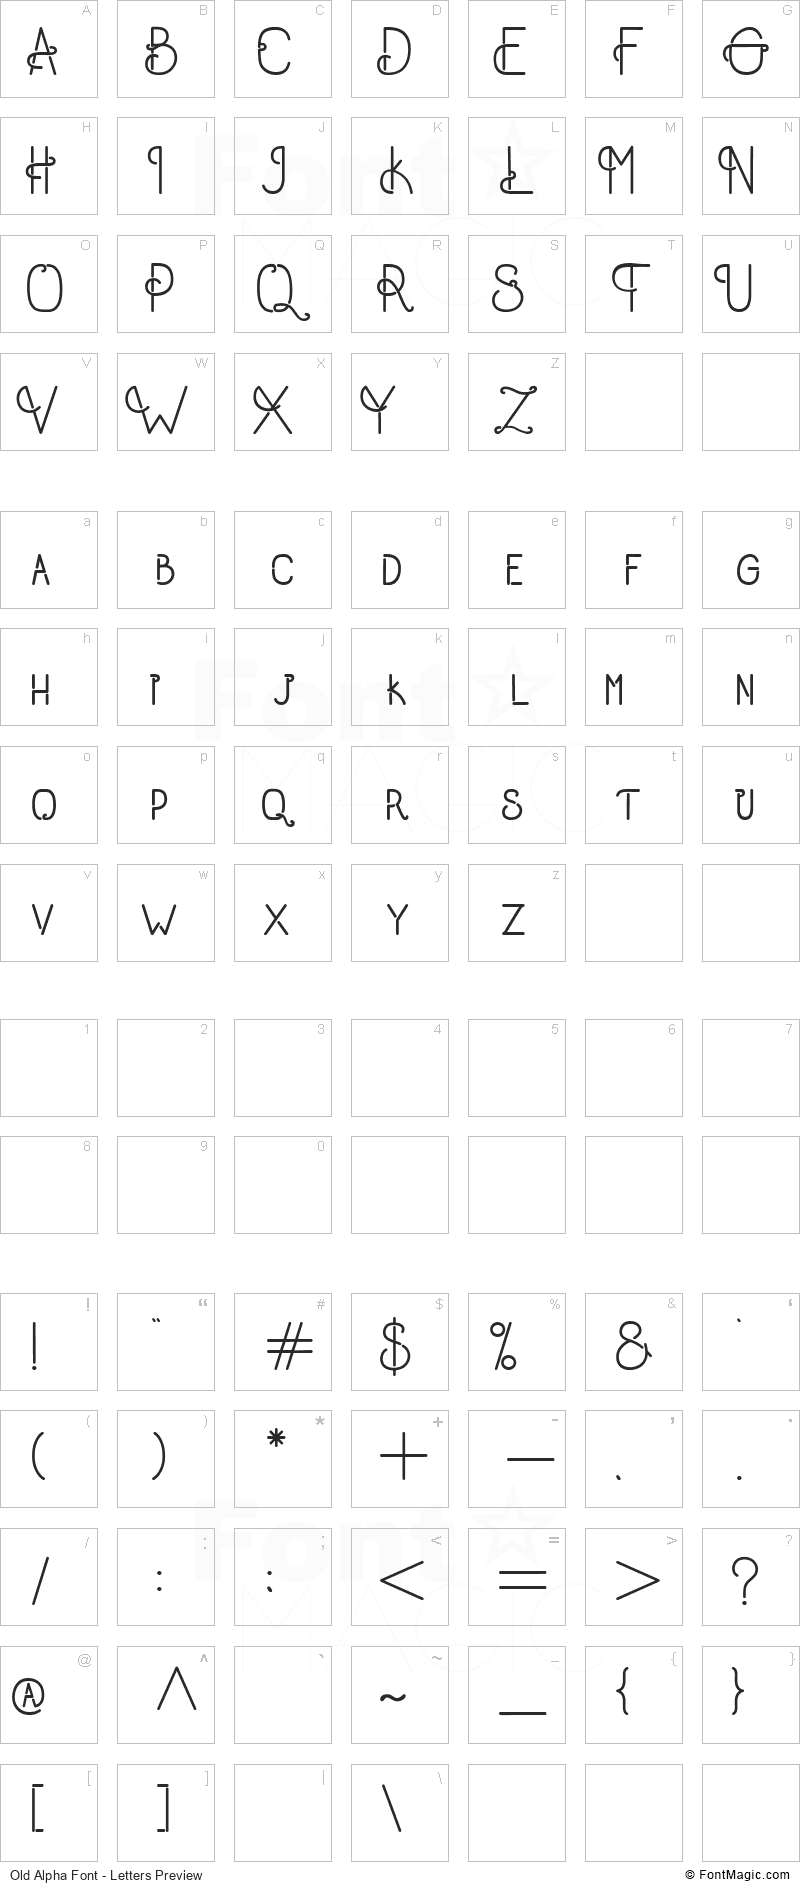 Old Alpha Font - All Latters Preview Chart